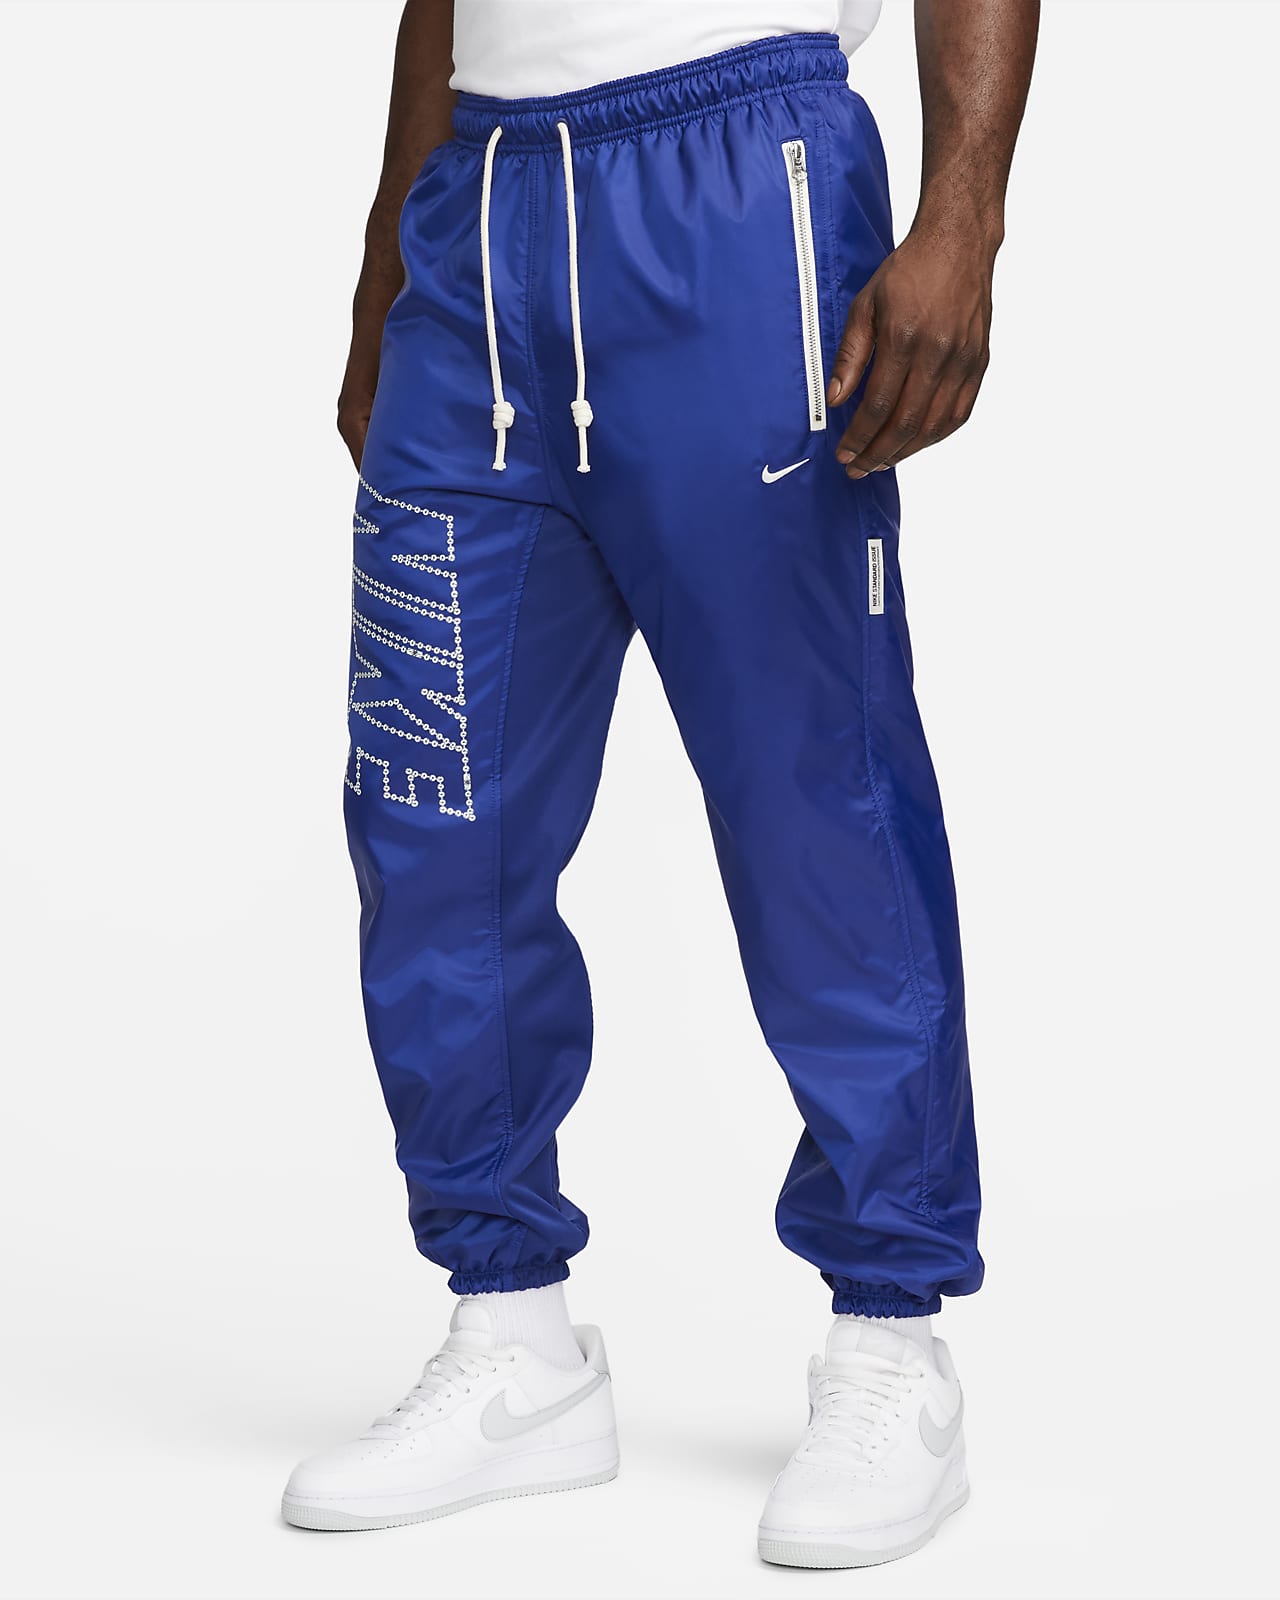 Nike Therma-FIT Standard Issue Men's Winterized Basketball Pants.